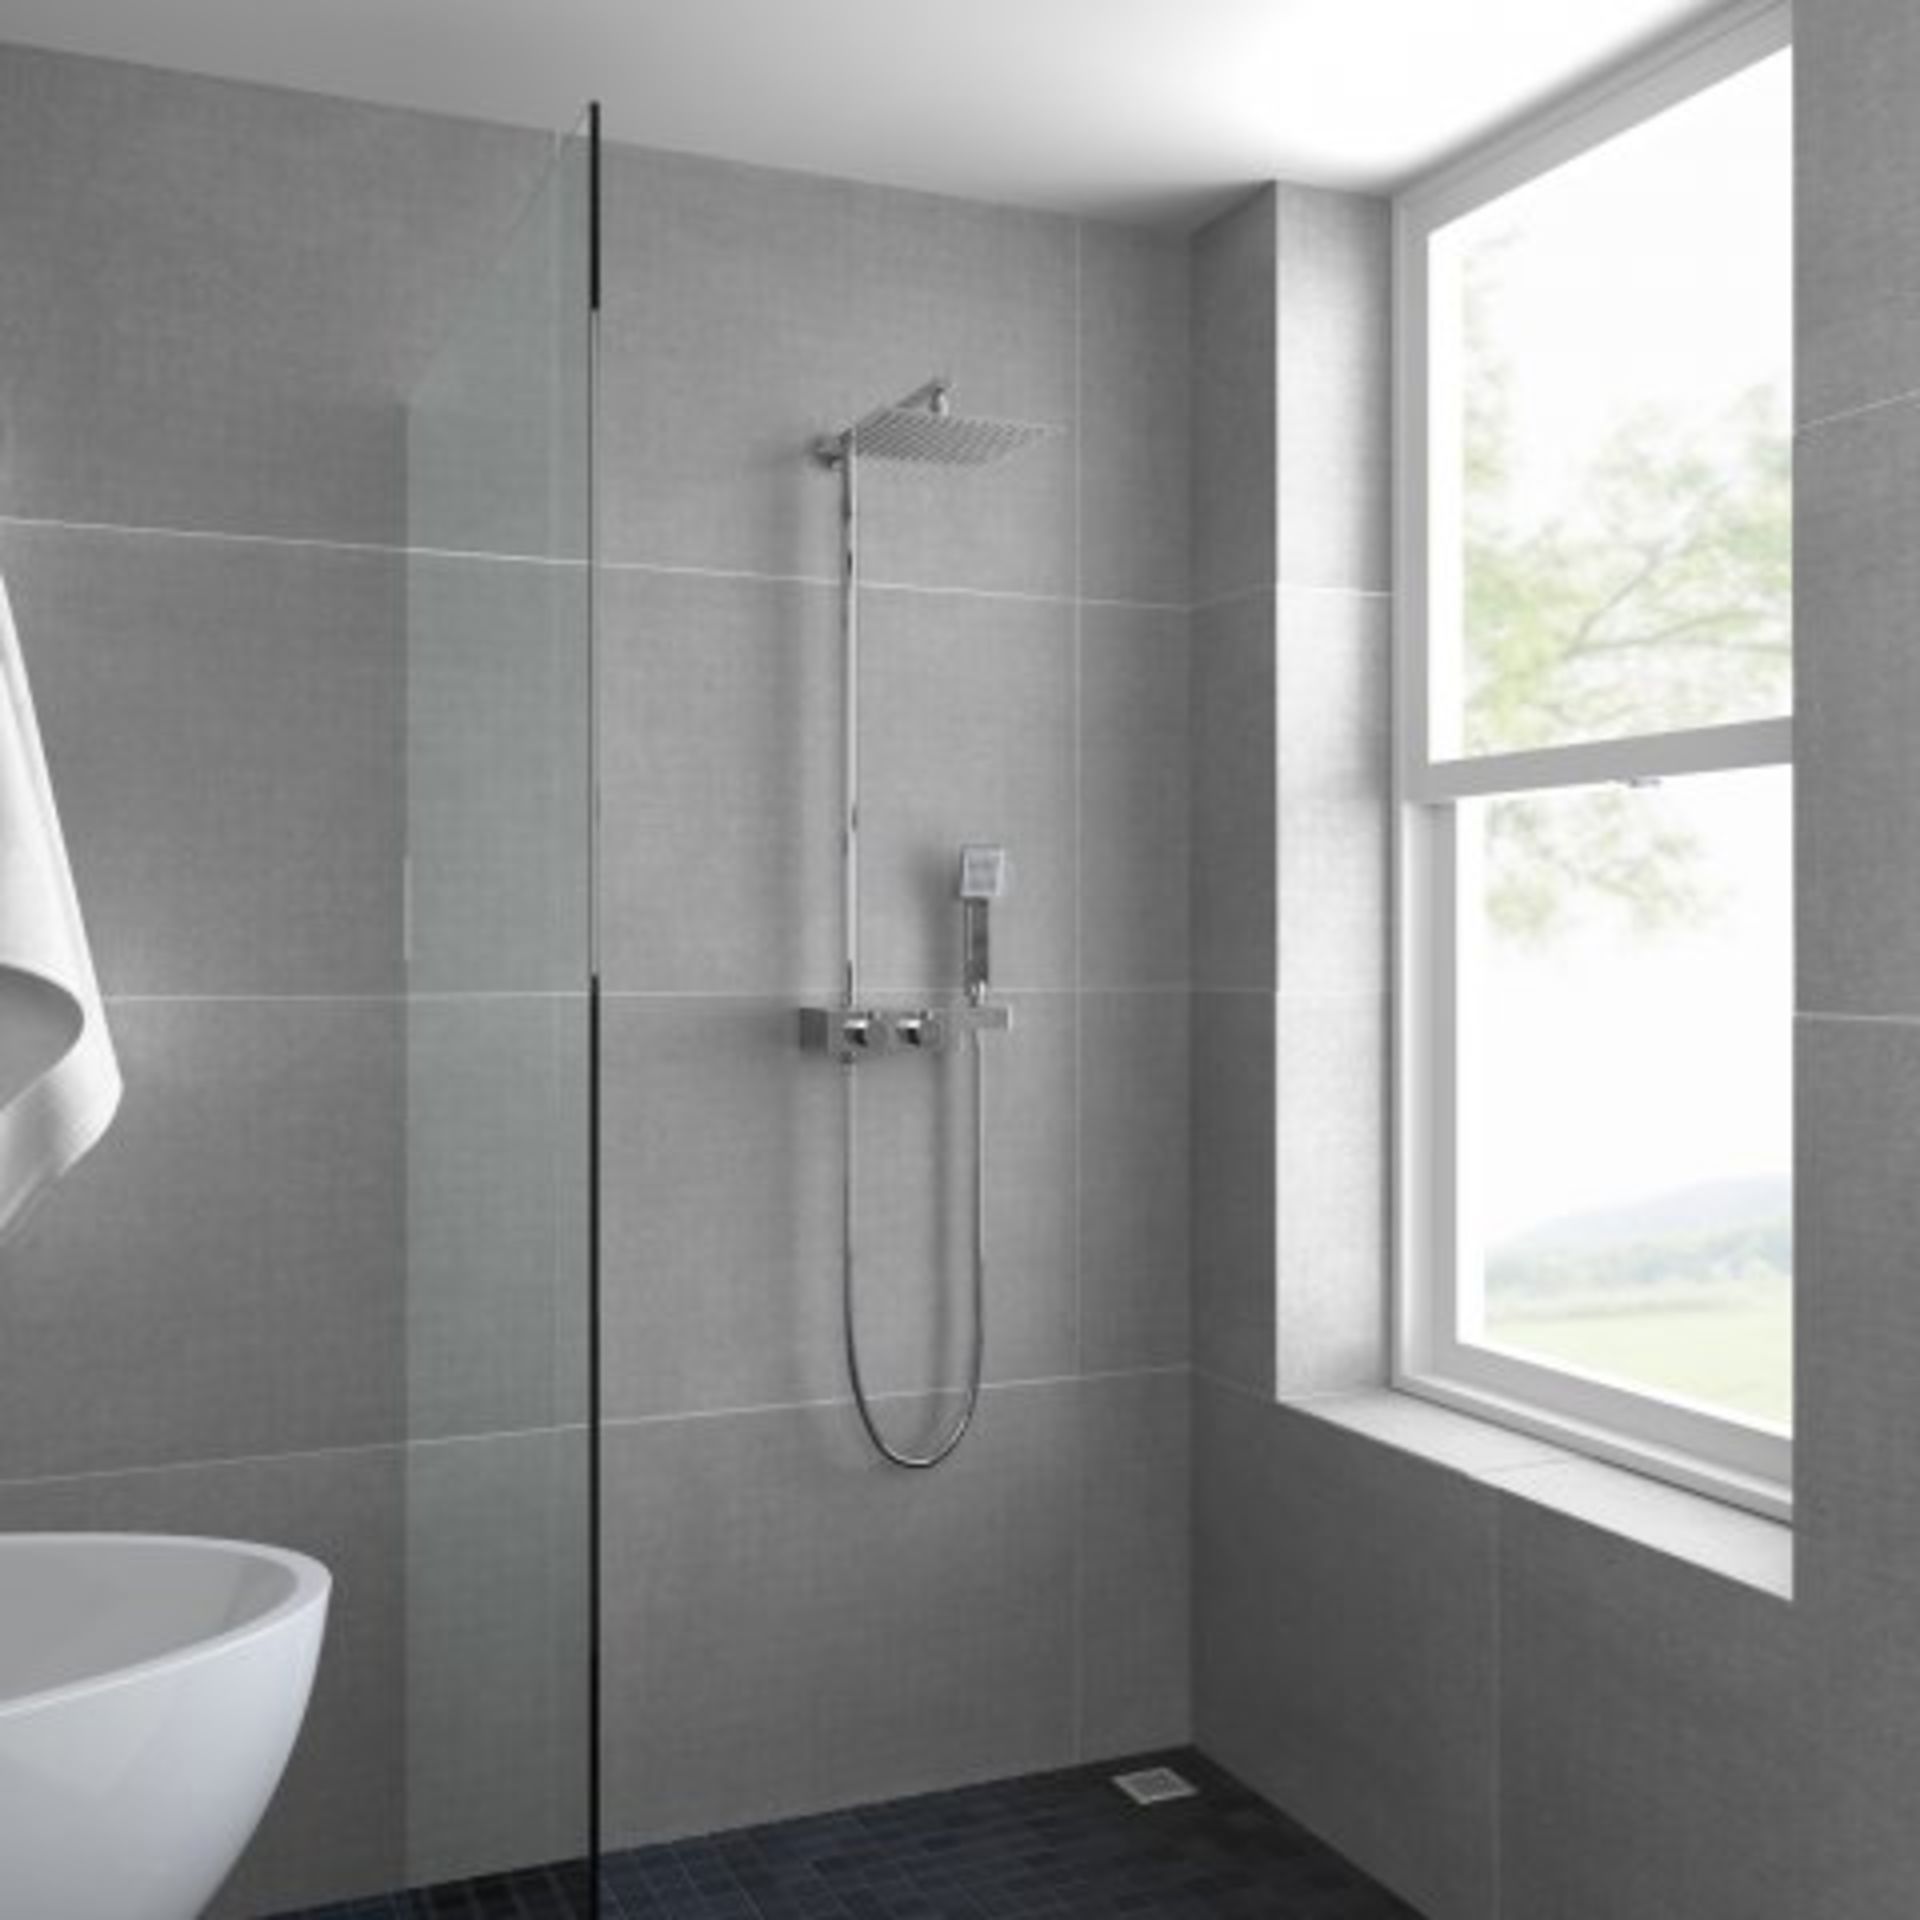 (J15) Thermostatic Exposed Shower Kit 250mm Square Head Handheld. RRP £349.99. Designer Style Our - Image 3 of 5